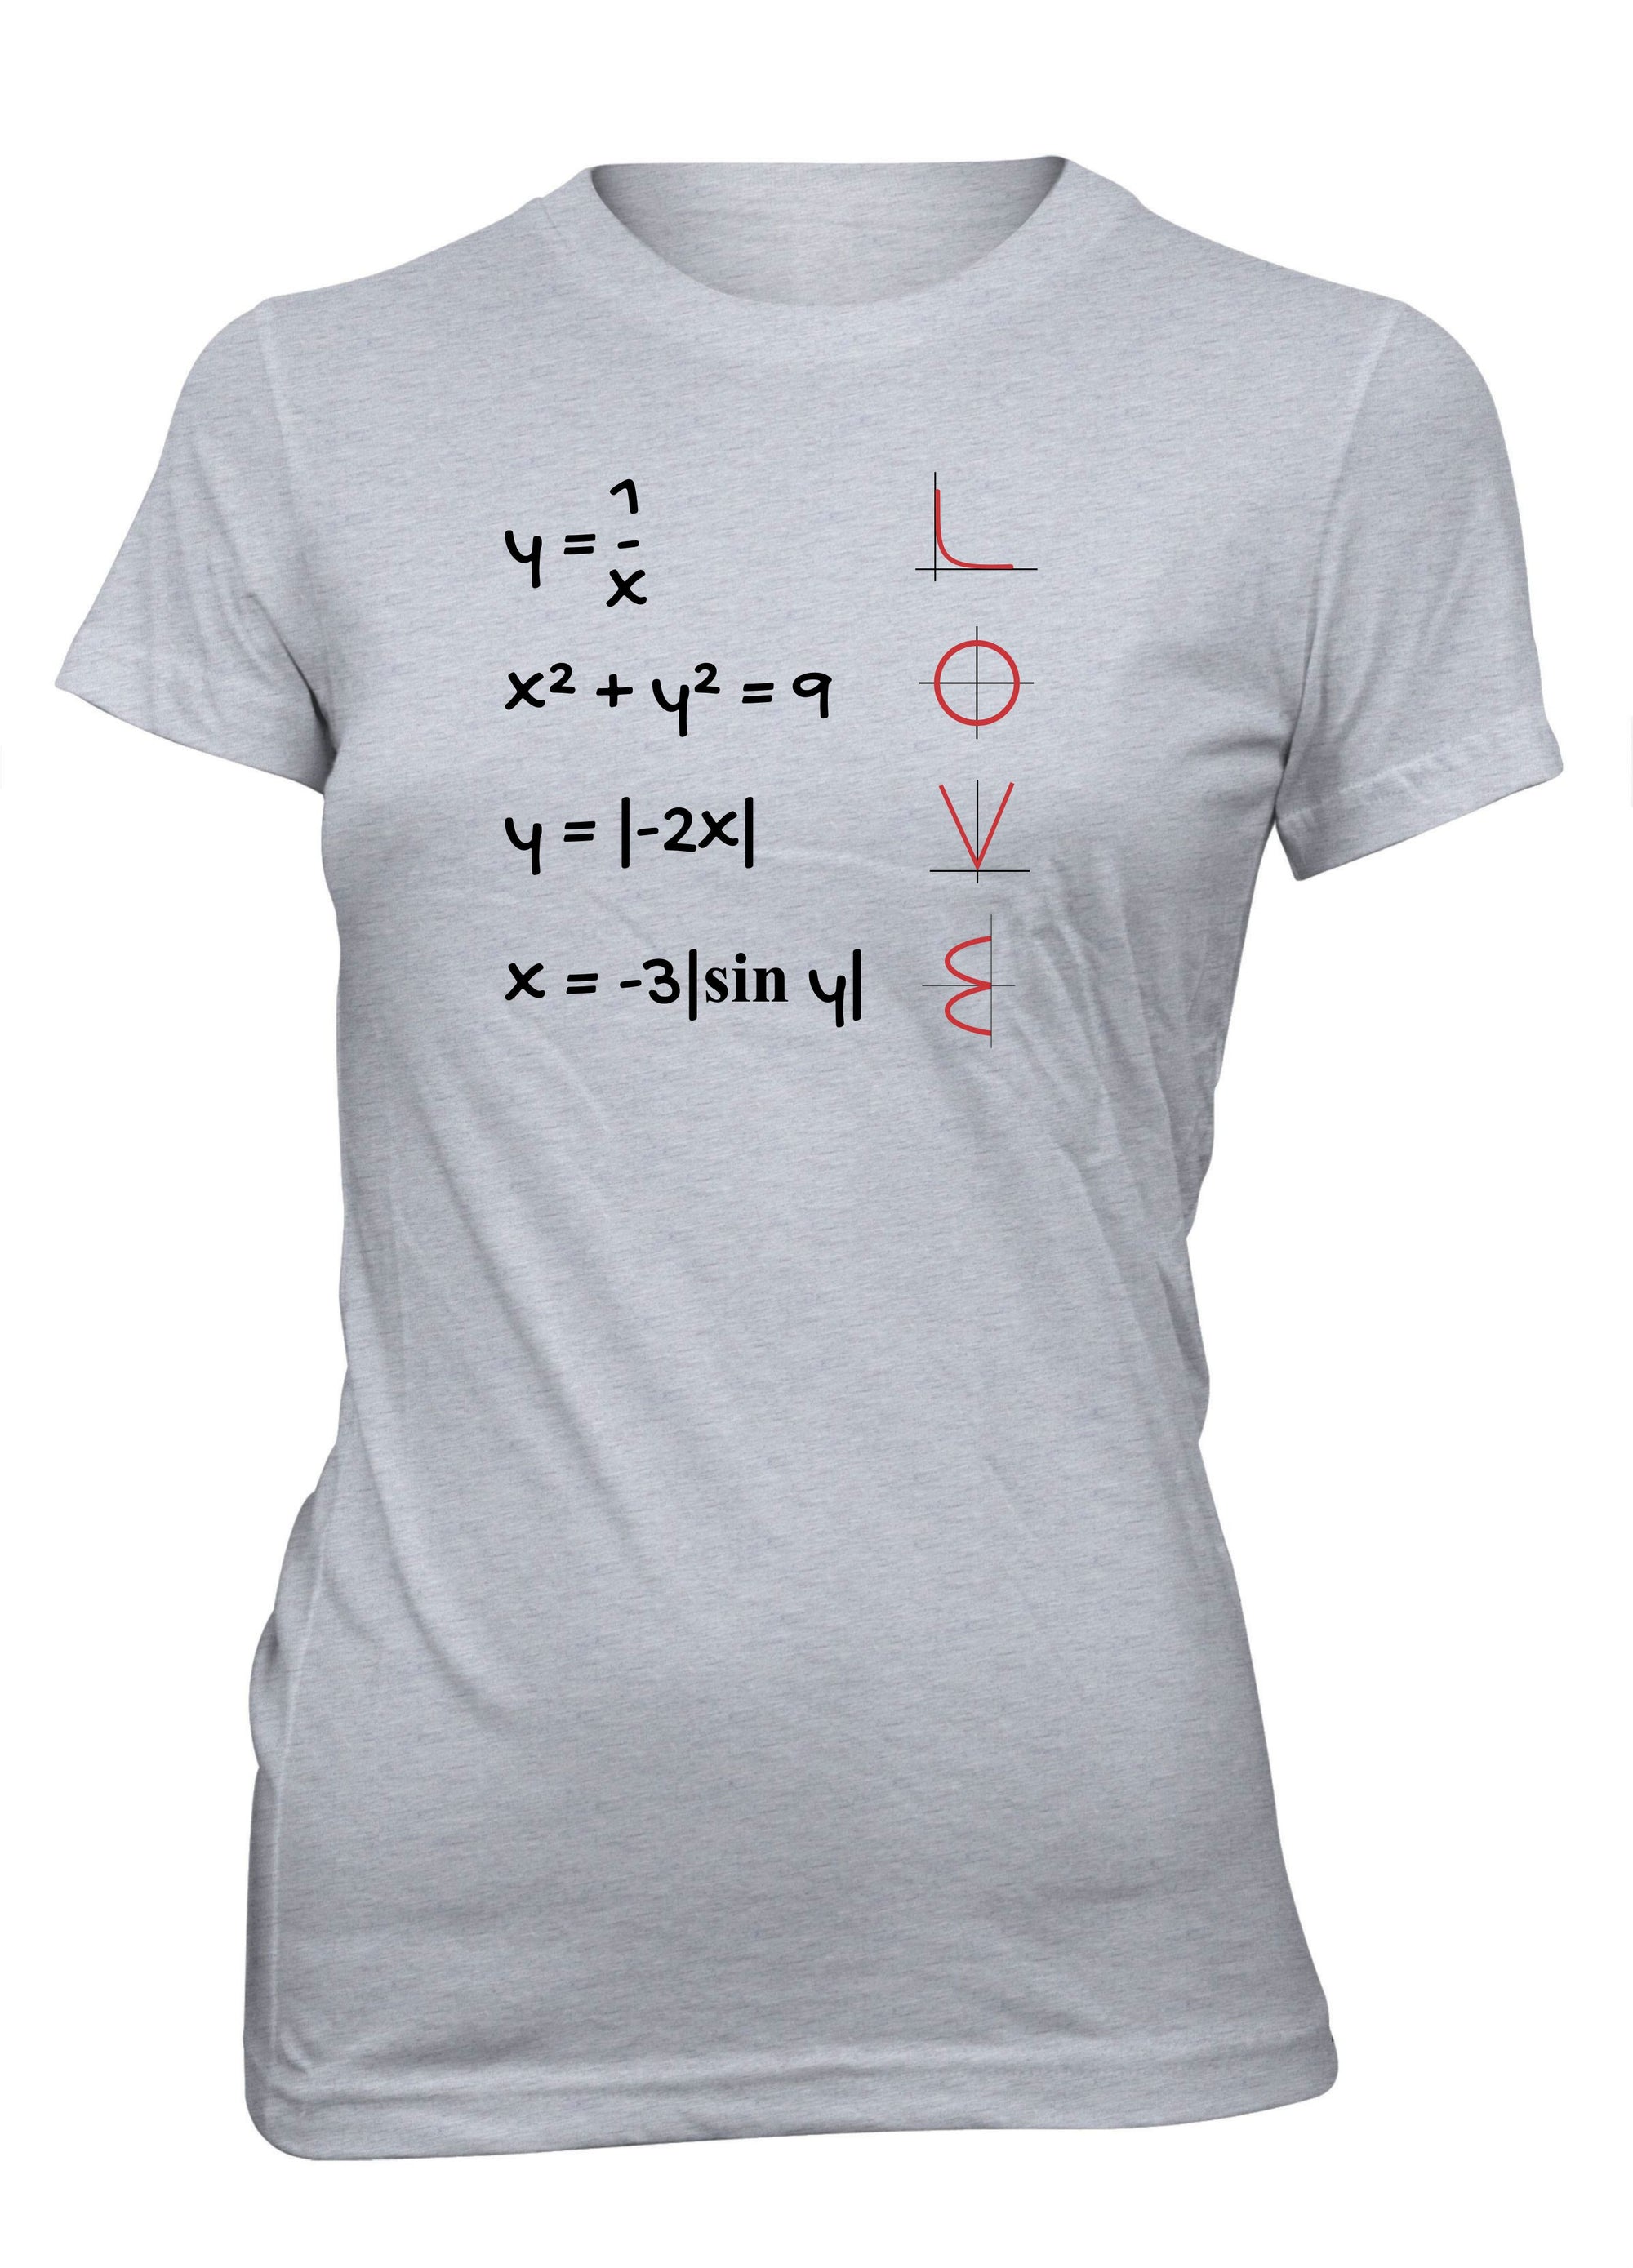 Love Equation Christian T Shirt for Juniors | Aprojes